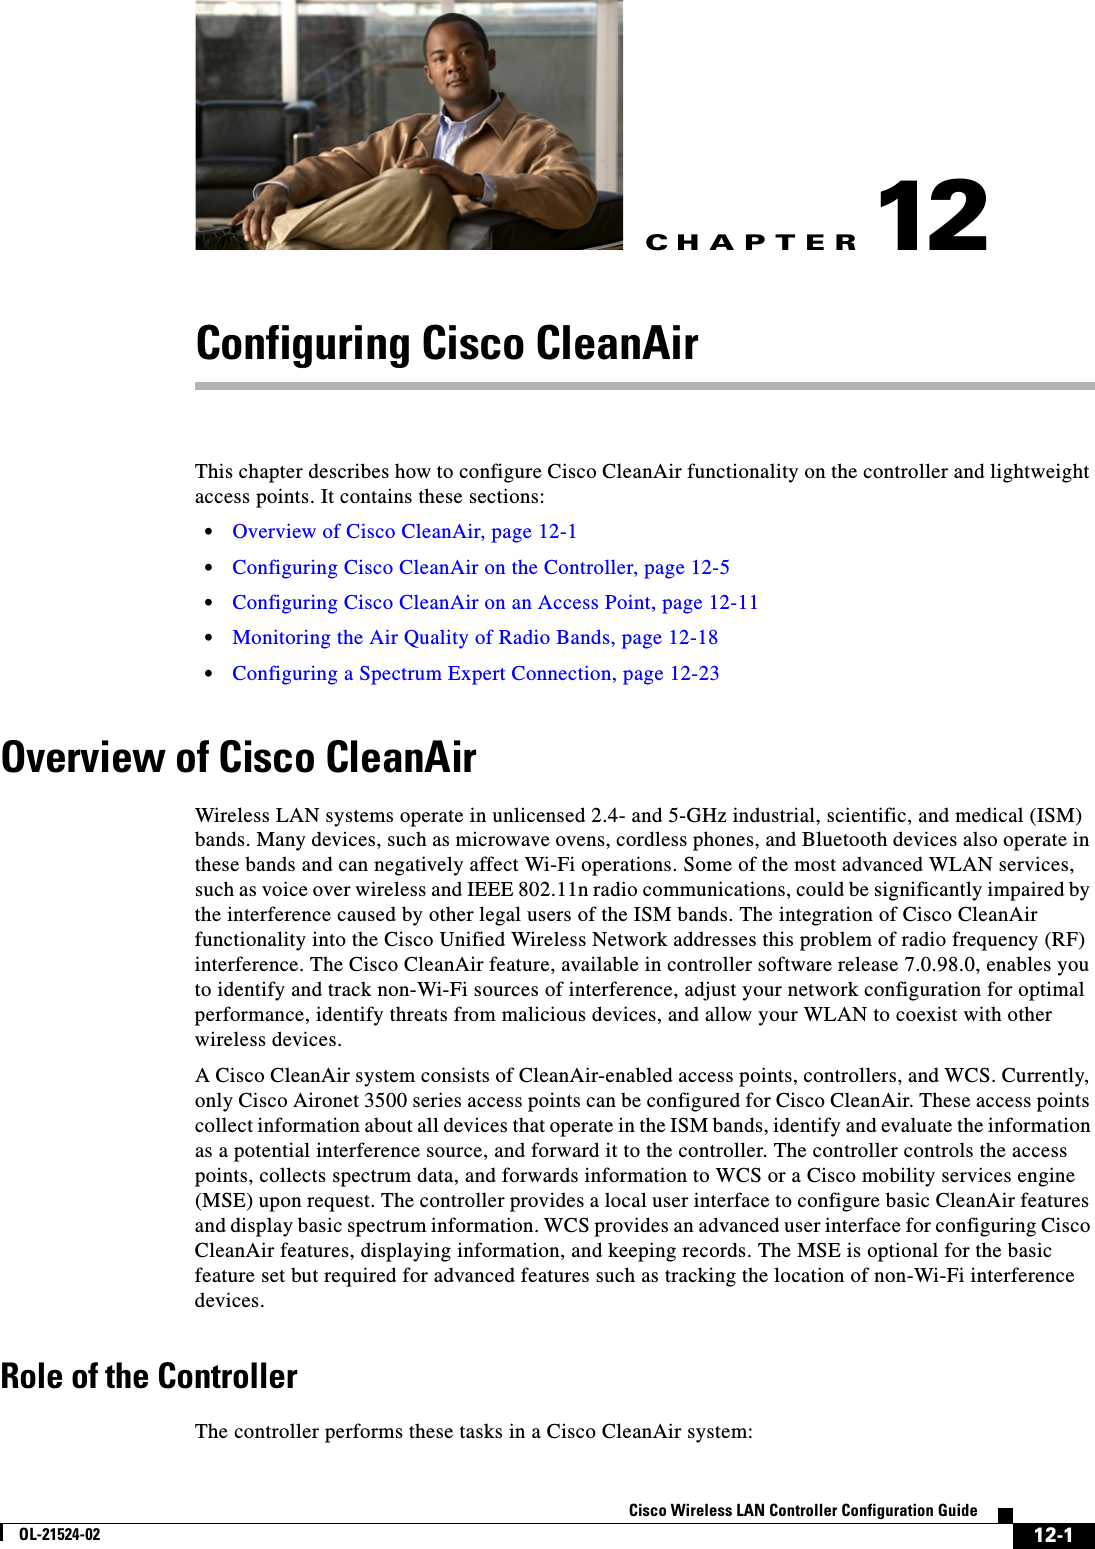 CHAPTER12-1Cisco Wireless LAN Controller Configuration GuideOL-21524-0212Configuring Cisco CleanAirThis chapter describes how to configure Cisco CleanAir functionality on the controller and lightweight access points. It contains these sections:  • Overview of Cisco CleanAir, page 12-1  • Configuring Cisco CleanAir on the Controller, page 12-5  • Configuring Cisco CleanAir on an Access Point, page 12-11  • Monitoring the Air Quality of Radio Bands, page 12-18  • Configuring a Spectrum Expert Connection, page 12-23Overview of Cisco CleanAirWireless LAN systems operate in unlicensed 2.4- and 5-GHz industrial, scientific, and medical (ISM) bands. Many devices, such as microwave ovens, cordless phones, and Bluetooth devices also operate in these bands and can negatively affect Wi-Fi operations. Some of the most advanced WLAN services, such as voice over wireless and IEEE 802.11n radio communications, could be significantly impaired by the interference caused by other legal users of the ISM bands. The integration of Cisco CleanAir functionality into the Cisco Unified Wireless Network addresses this problem of radio frequency (RF) interference. The Cisco CleanAir feature, available in controller software release 7.0.98.0, enables you to identify and track non-Wi-Fi sources of interference, adjust your network configuration for optimal performance, identify threats from malicious devices, and allow your WLAN to coexist with other wireless devices.A Cisco CleanAir system consists of CleanAir-enabled access points, controllers, and WCS. Currently, only Cisco Aironet 3500 series access points can be configured for Cisco CleanAir. These access points collect information about all devices that operate in the ISM bands, identify and evaluate the information as a potential interference source, and forward it to the controller. The controller controls the access points, collects spectrum data, and forwards information to WCS or a Cisco mobility services engine (MSE) upon request. The controller provides a local user interface to configure basic CleanAir features and display basic spectrum information. WCS provides an advanced user interface for configuring Cisco CleanAir features, displaying information, and keeping records. The MSE is optional for the basic feature set but required for advanced features such as tracking the location of non-Wi-Fi interference devices.Role of the ControllerThe controller performs these tasks in a Cisco CleanAir system: